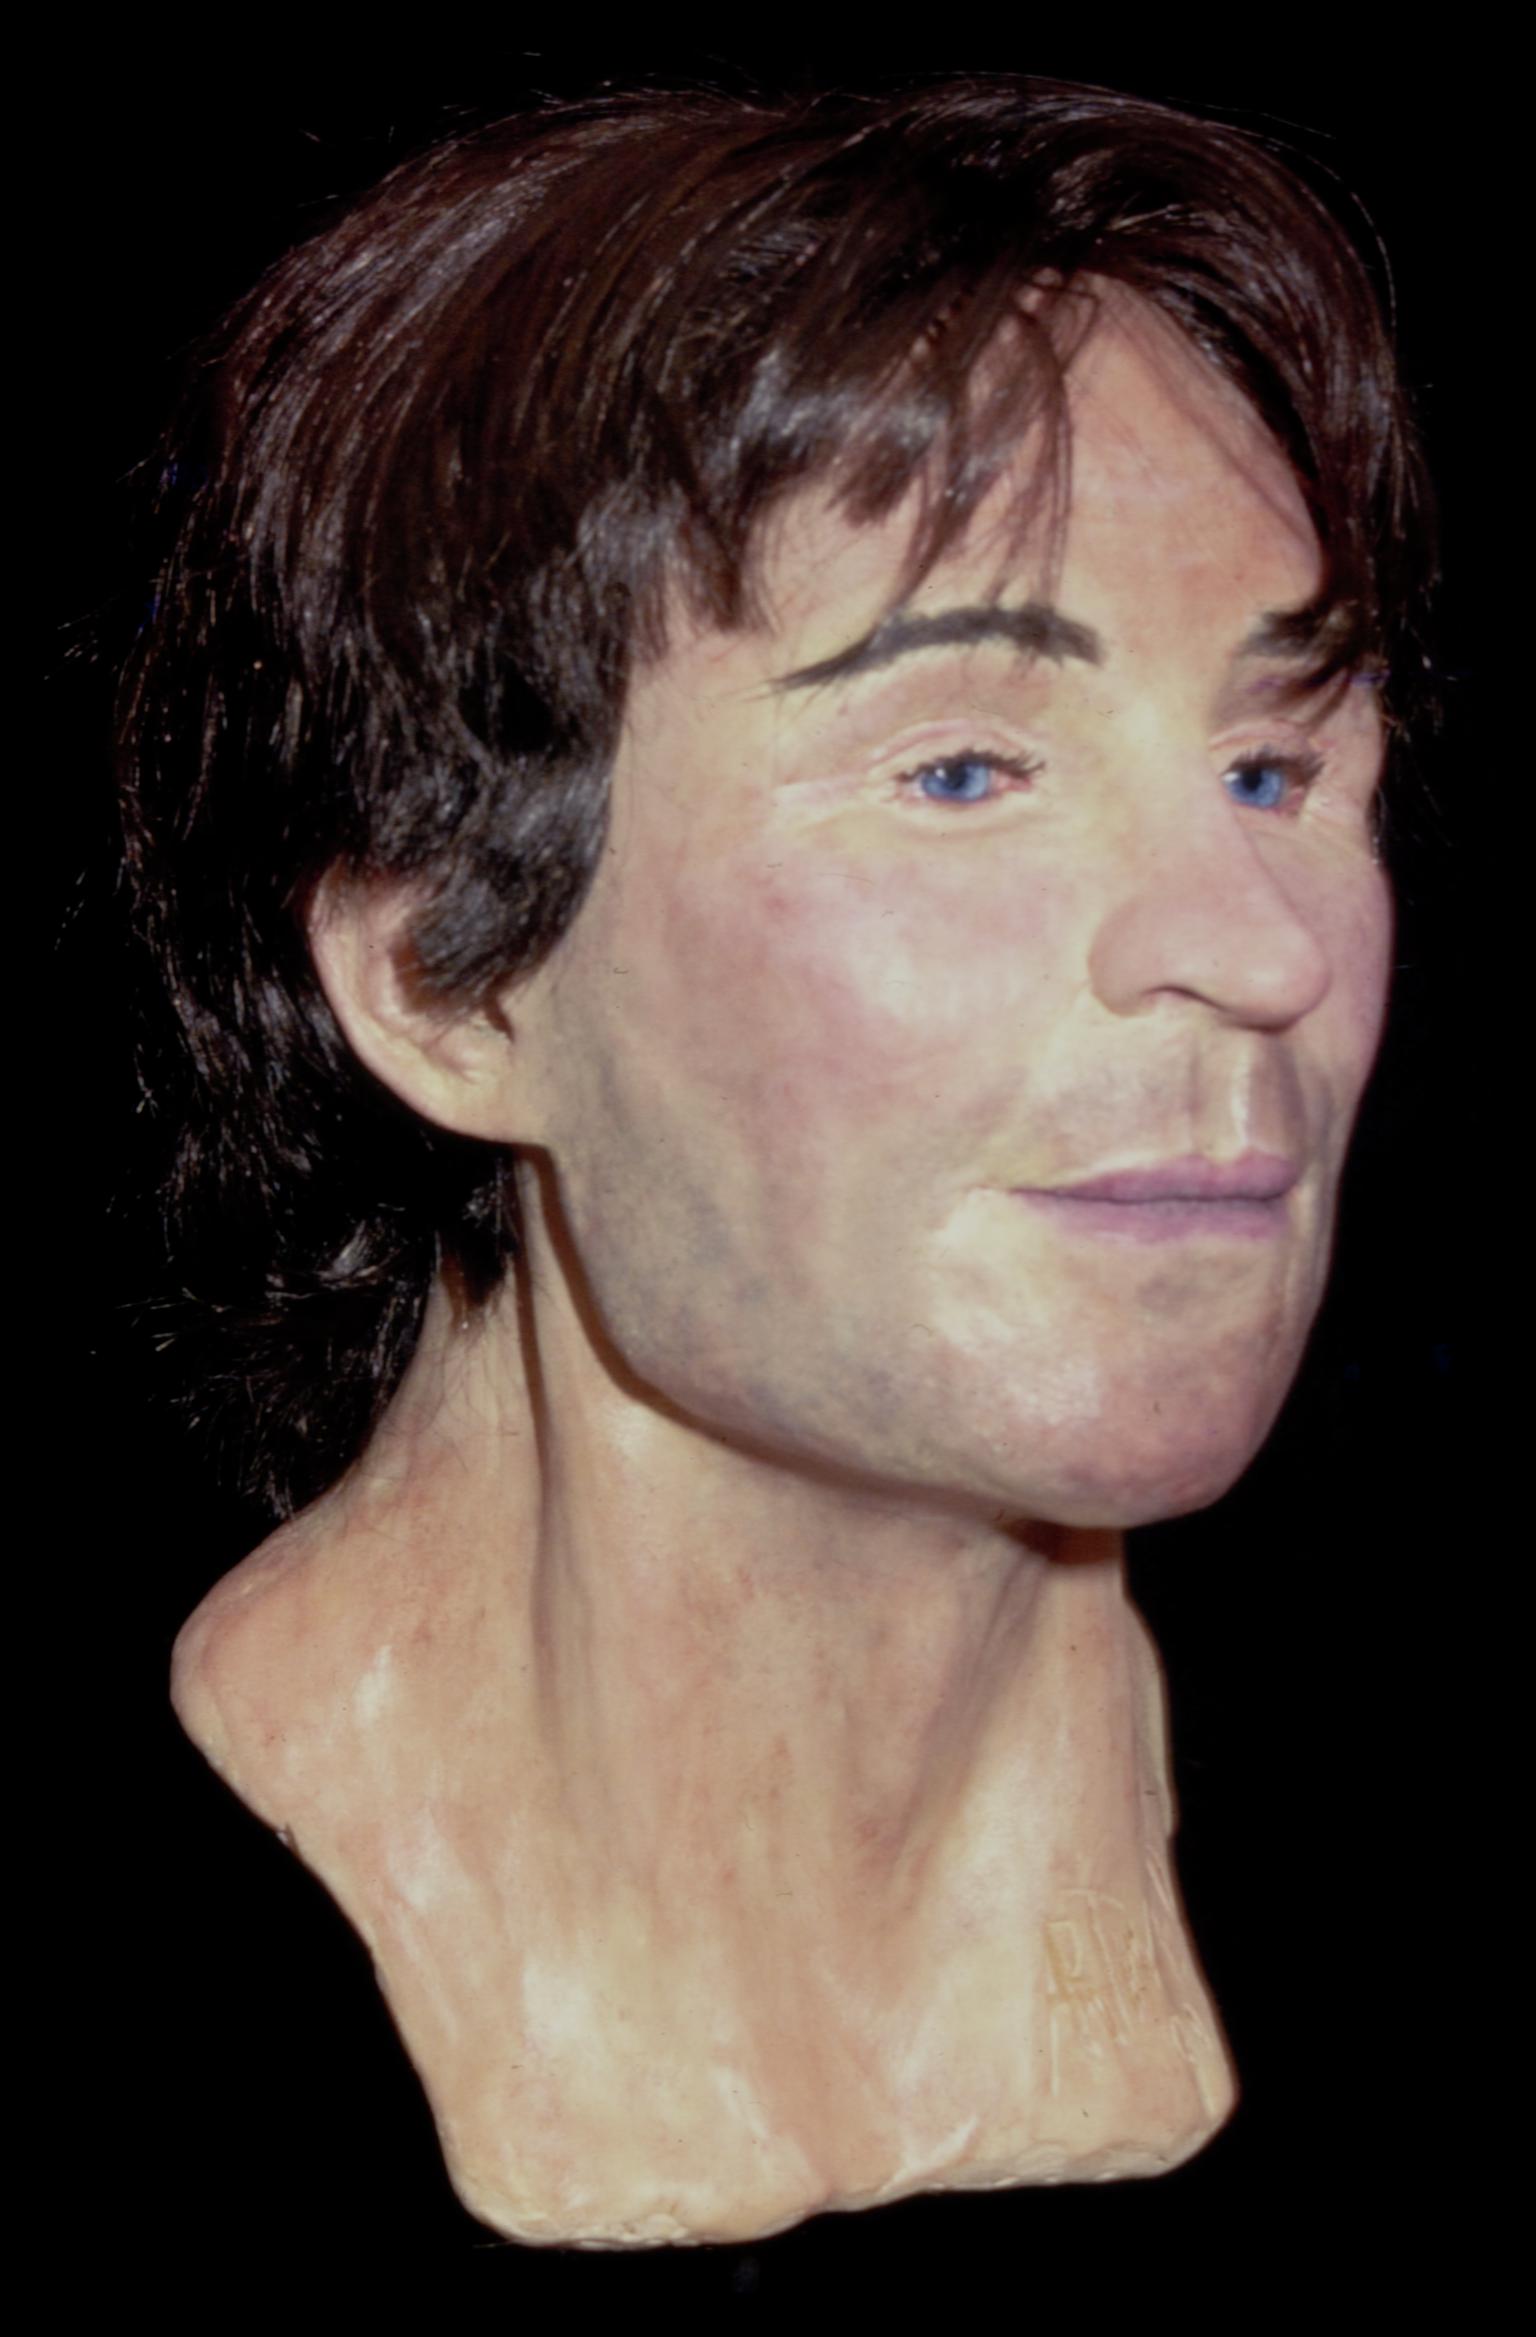 Early Medieval human head (reconstruction)